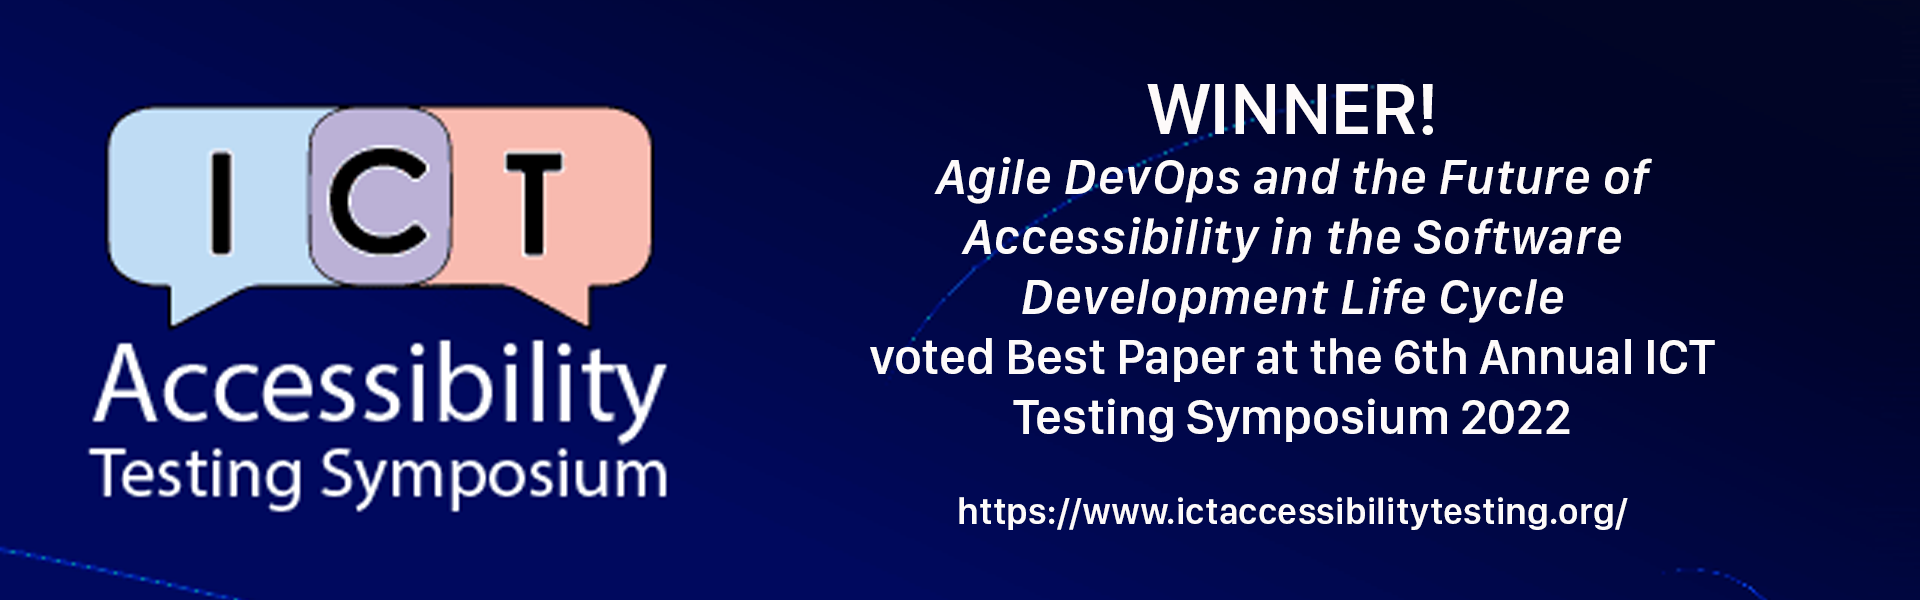 WINNER! Agile DevOps and the Future of Accessibility in the Software Development Life Cycle voted Best Paper at the 6th Annual ICT Testing Symposium 2022